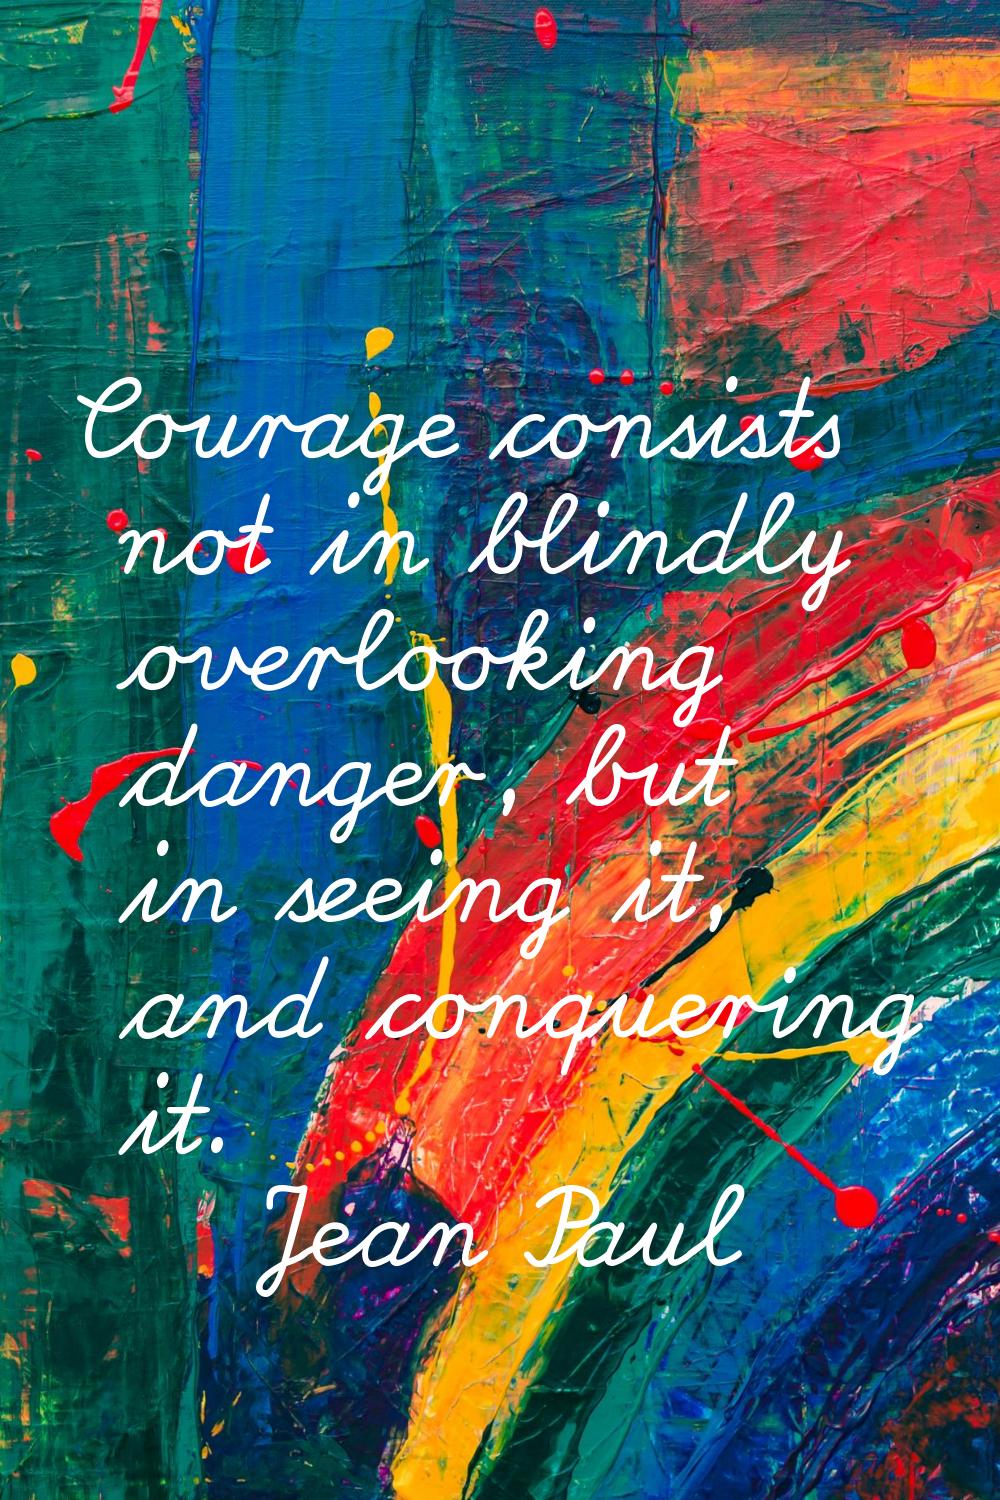 Courage consists not in blindly overlooking danger, but in seeing it, and conquering it.